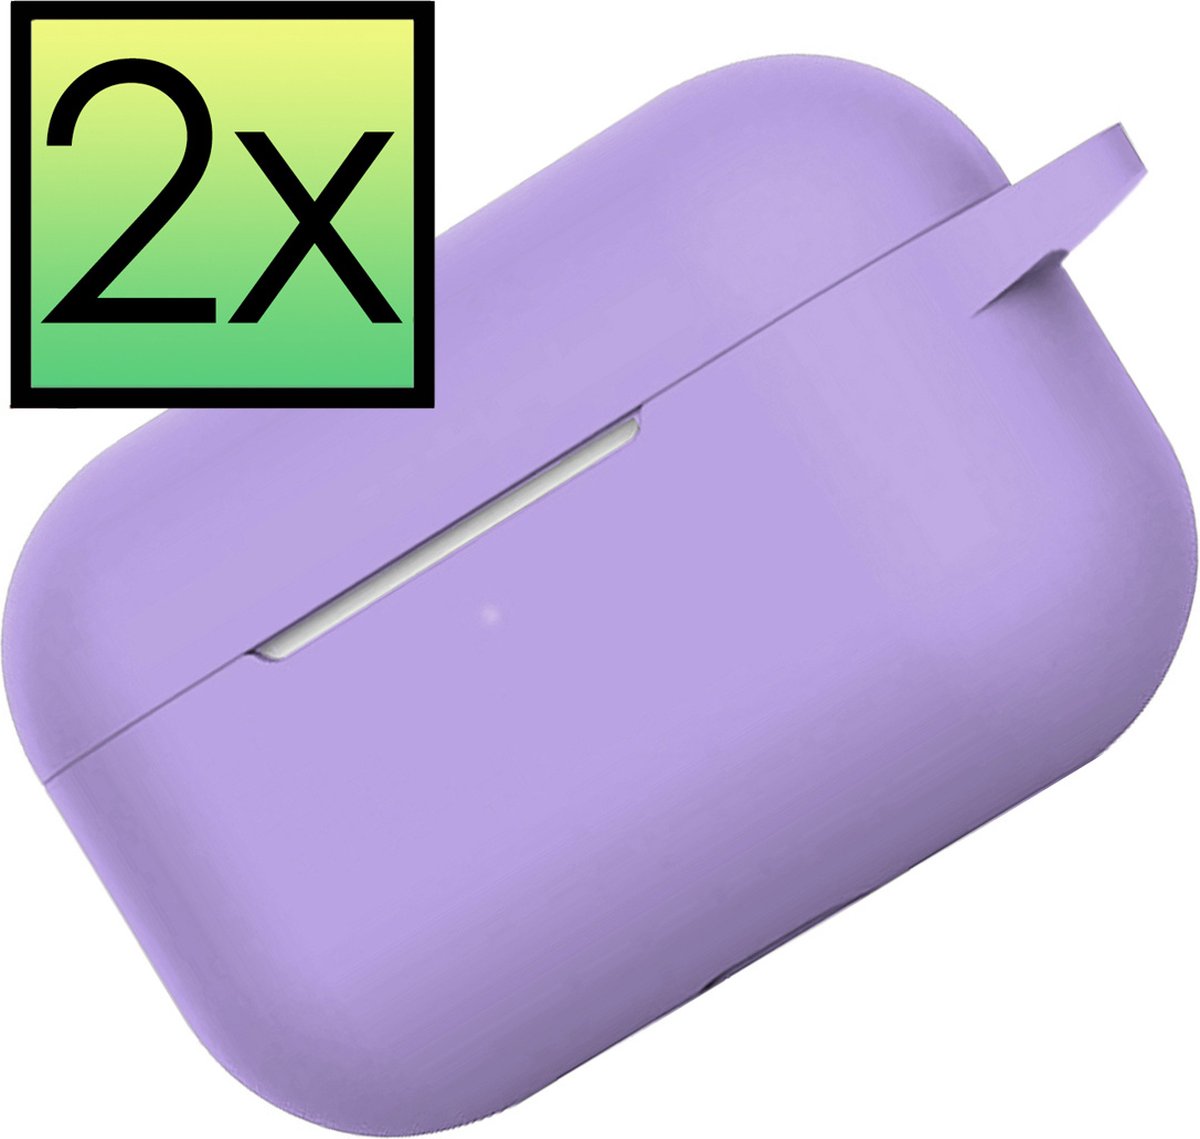 Hoes Geschikt voor AirPods Pro 2 Hoesje Cover Silicone Case Hoes - 2x - Lila